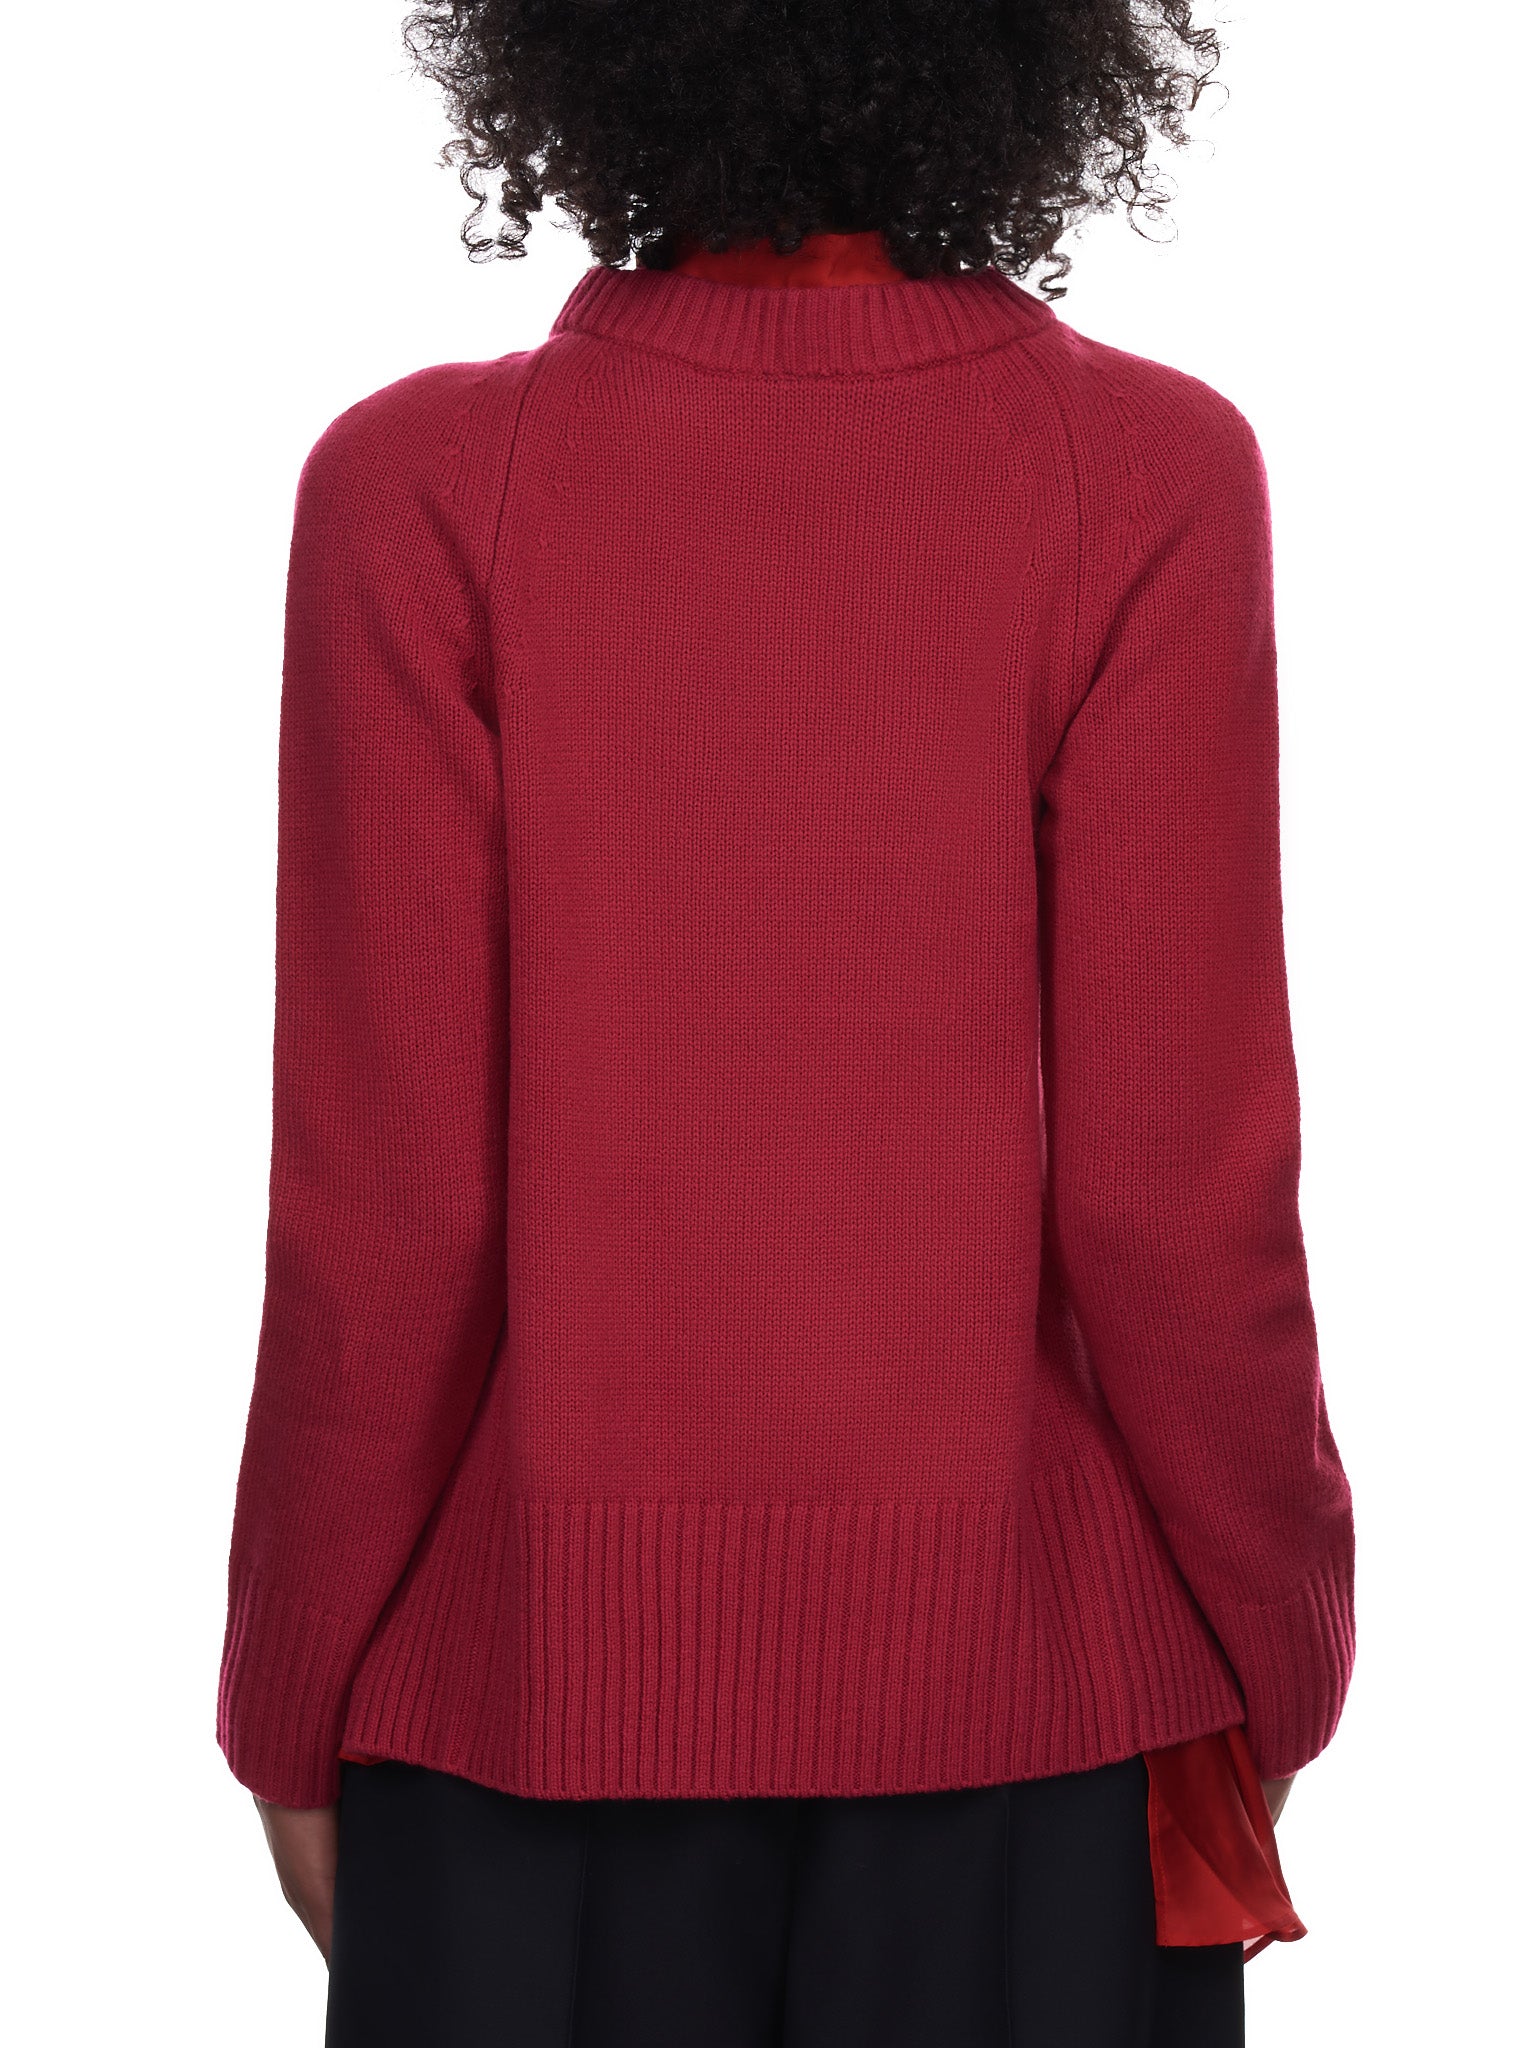 Wool Knit X Satin Sweater (21-05831-PINK-RED)